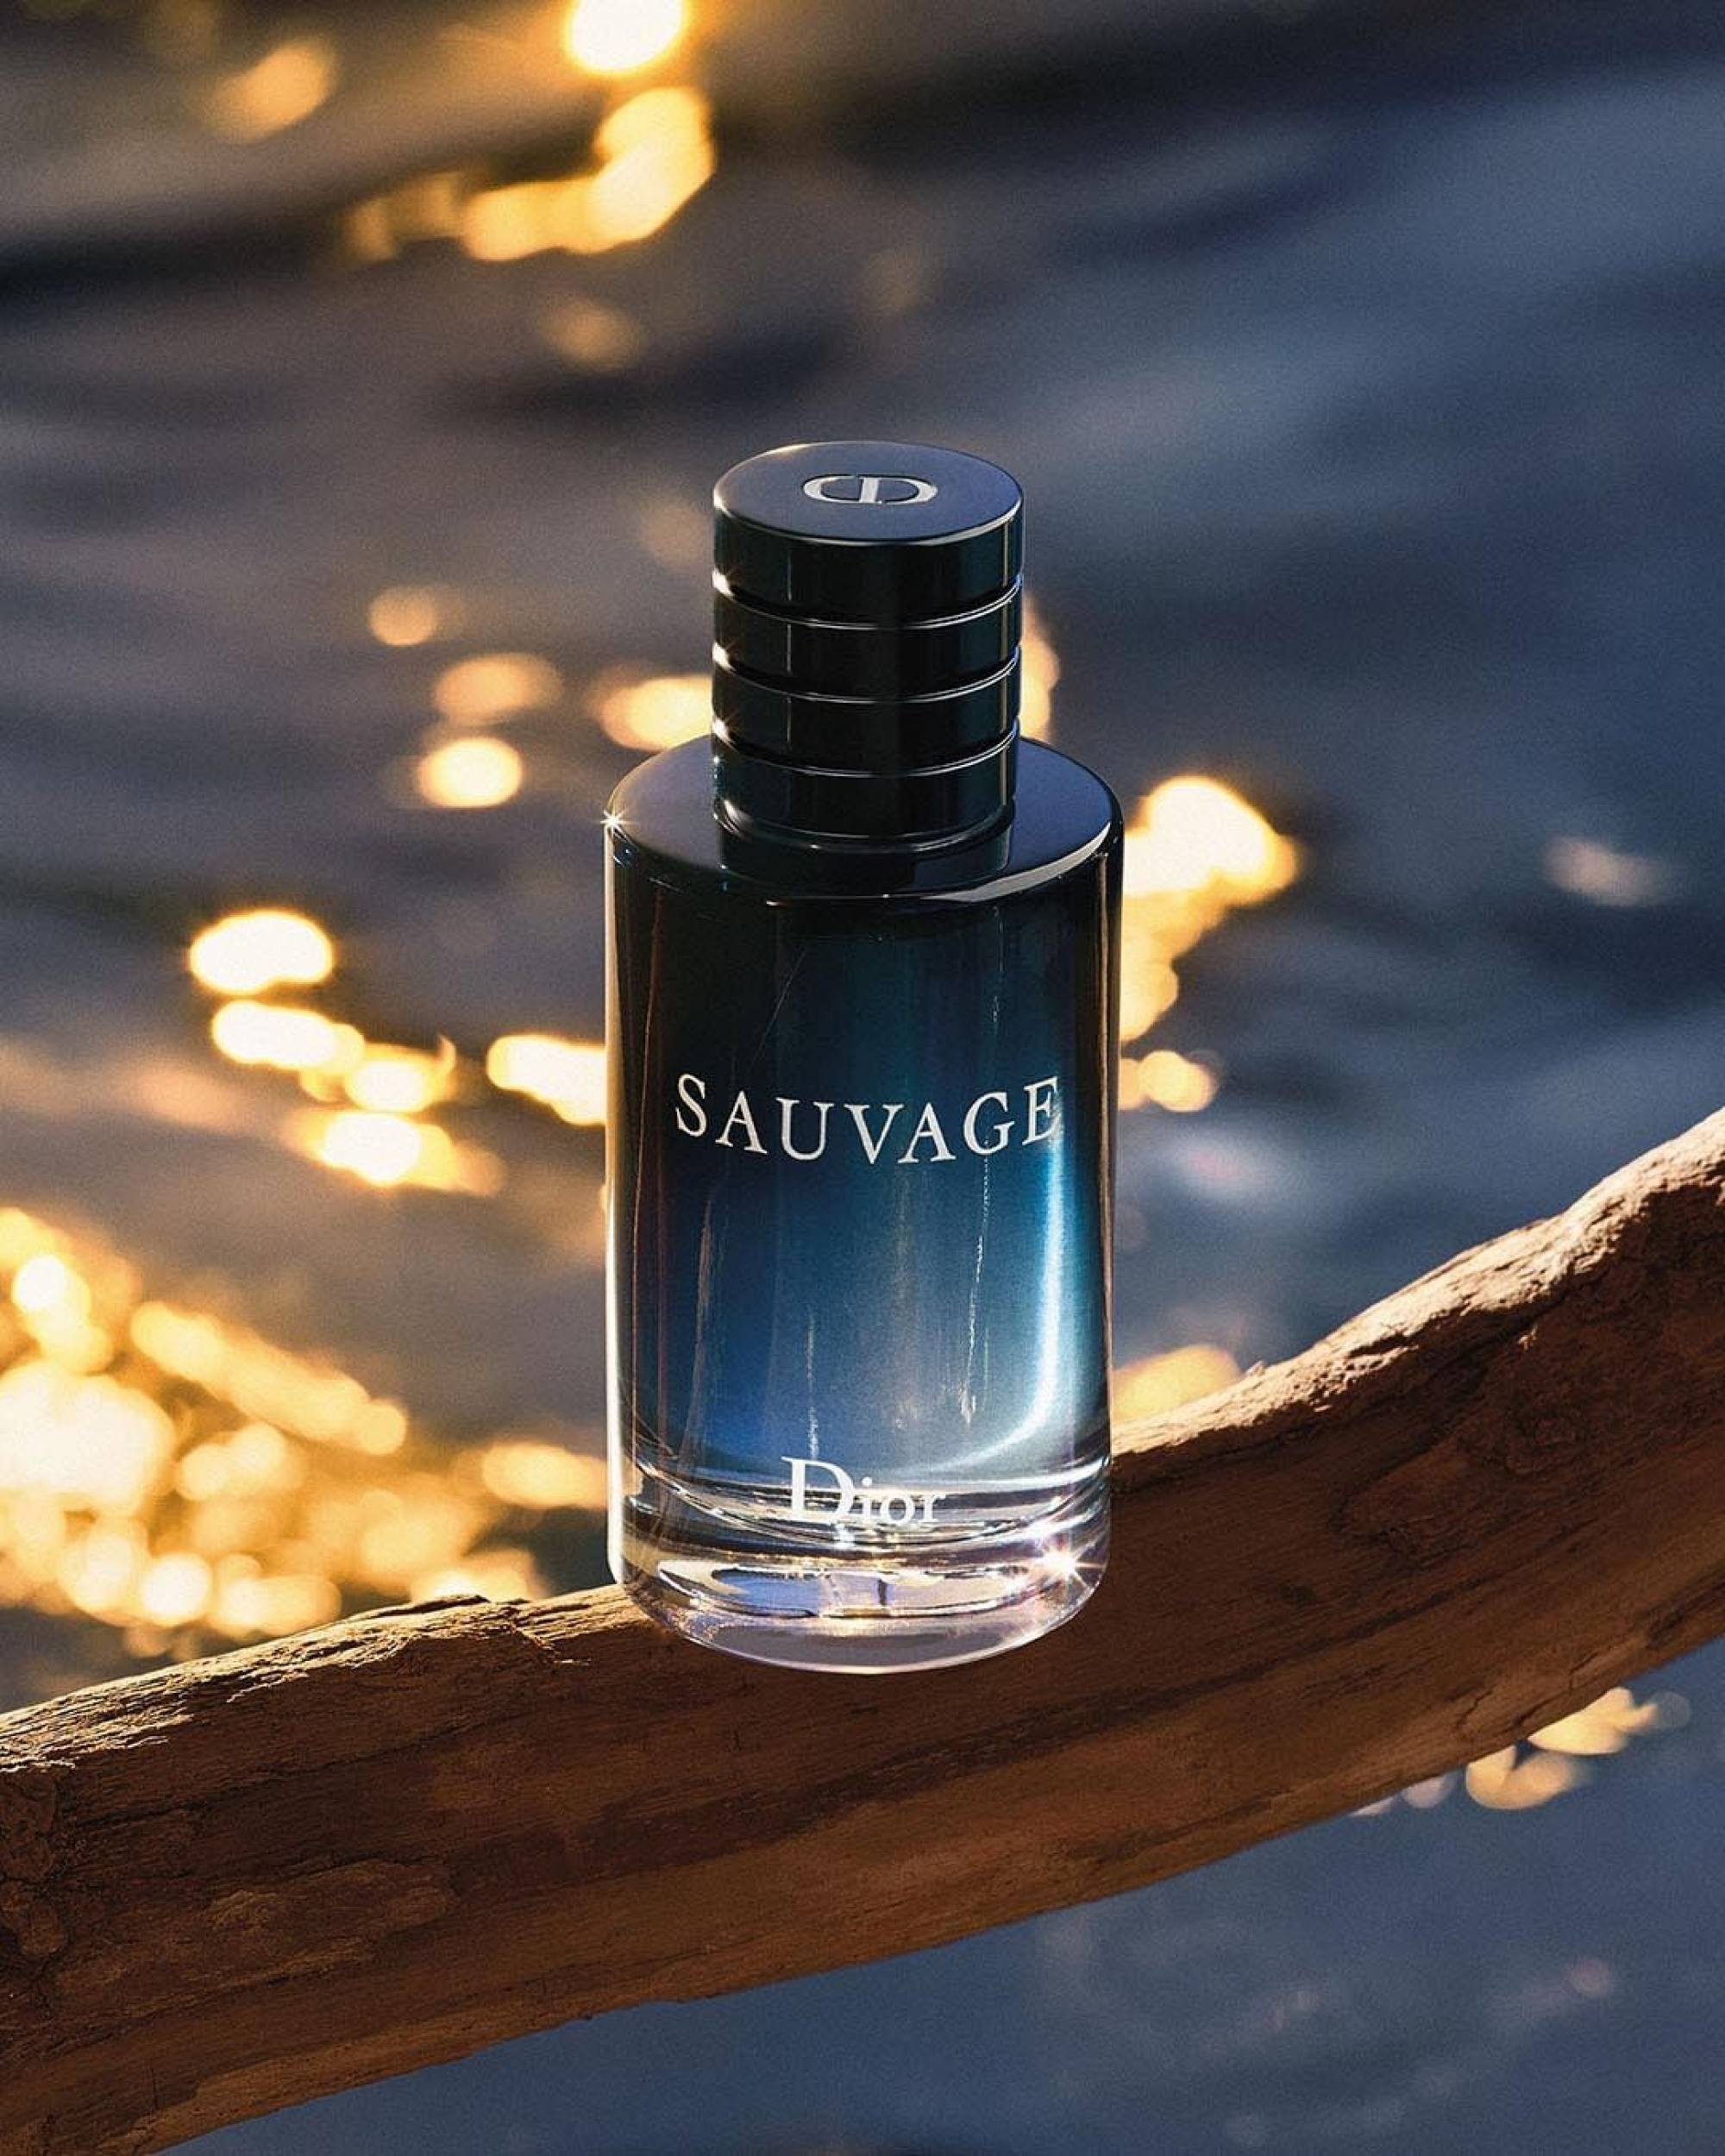 Johnny Depp embodies Sauvage, the new men's fragrance from Dior - LVMH